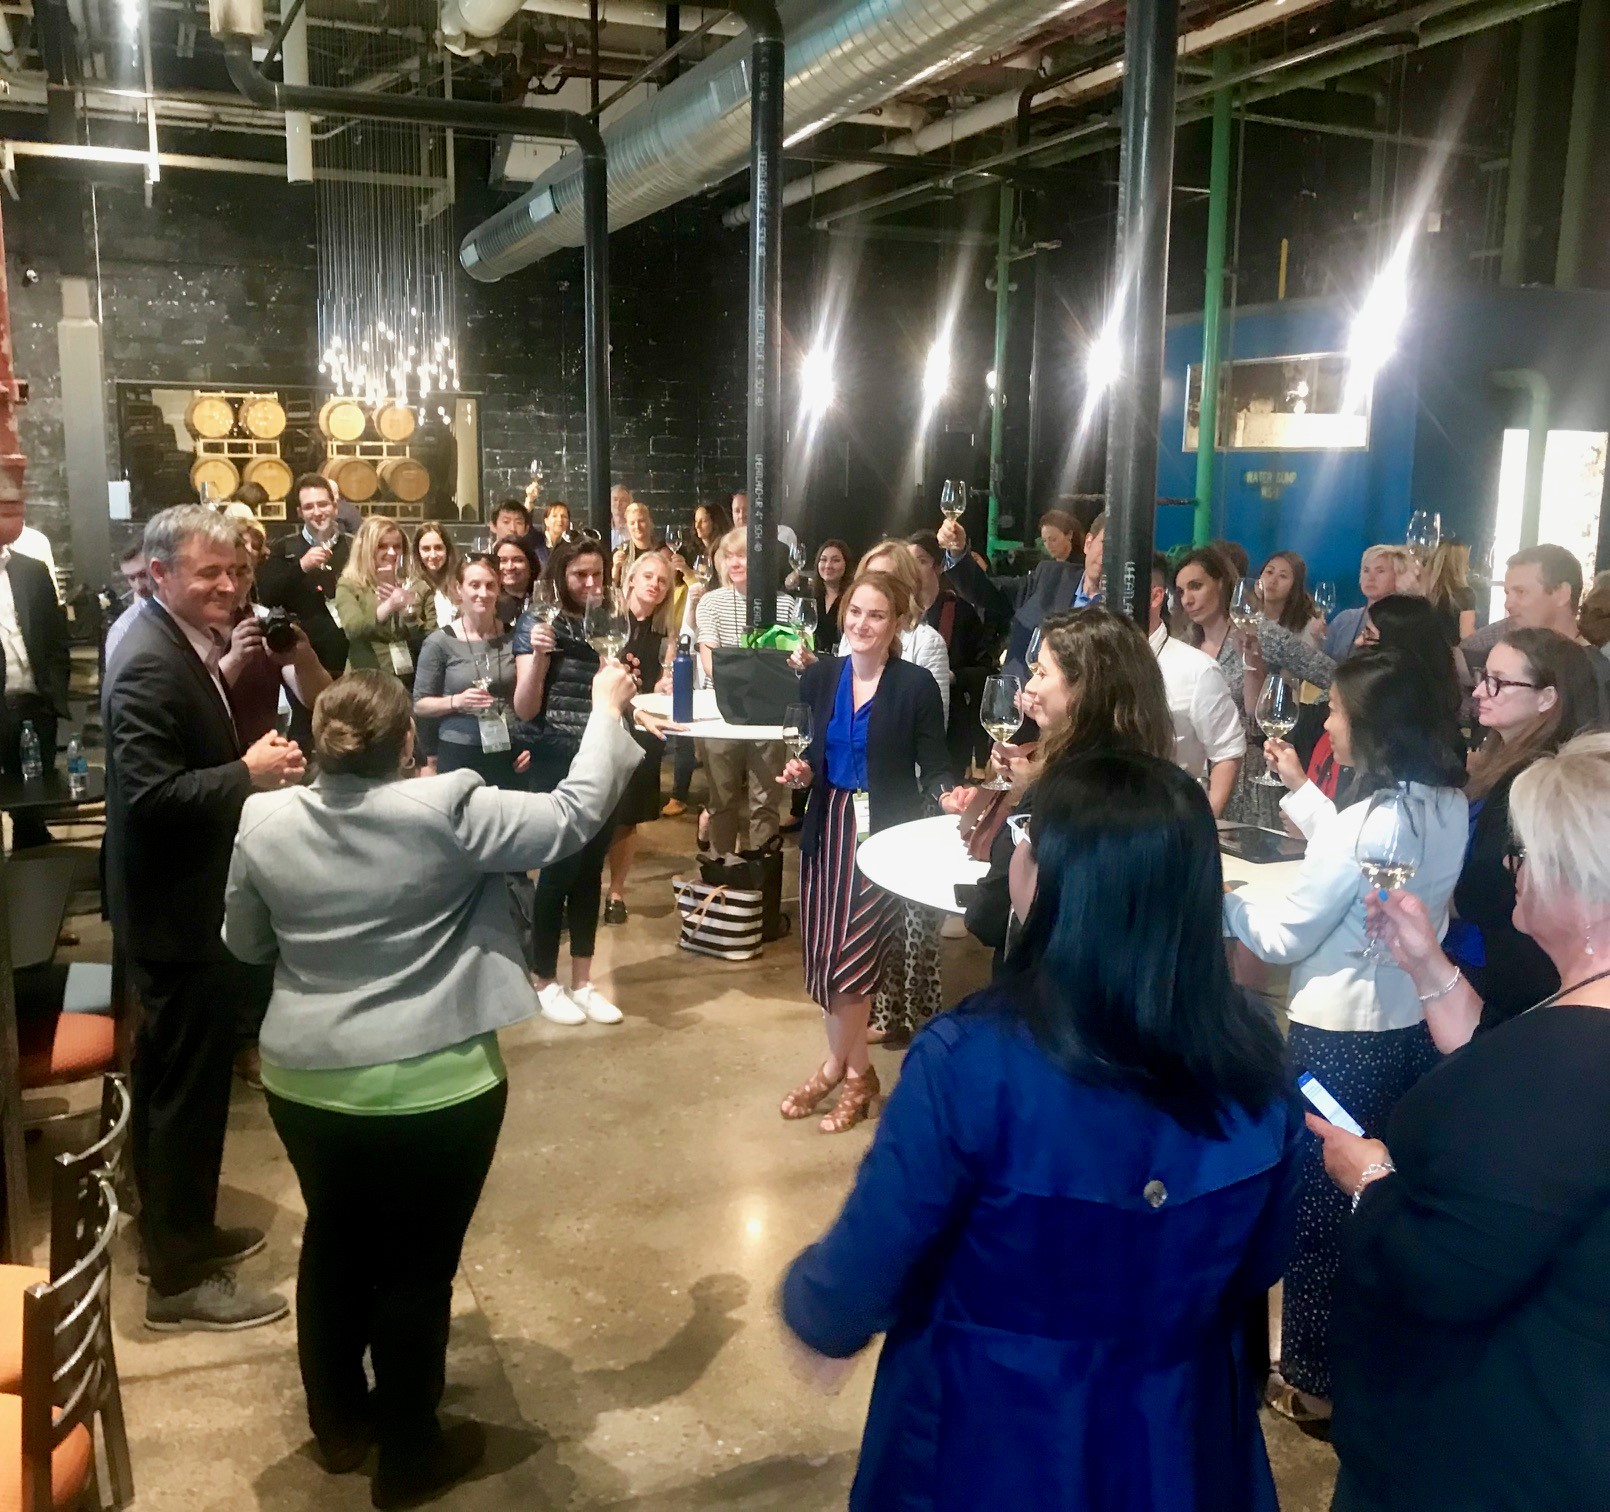 Jennifer Broome, vice president of philanthropy, raises a glass to toast the participants and local hosts while at Detroit Vineyards, the last stop on the Deep Roots Detroit Sustainability Tour.